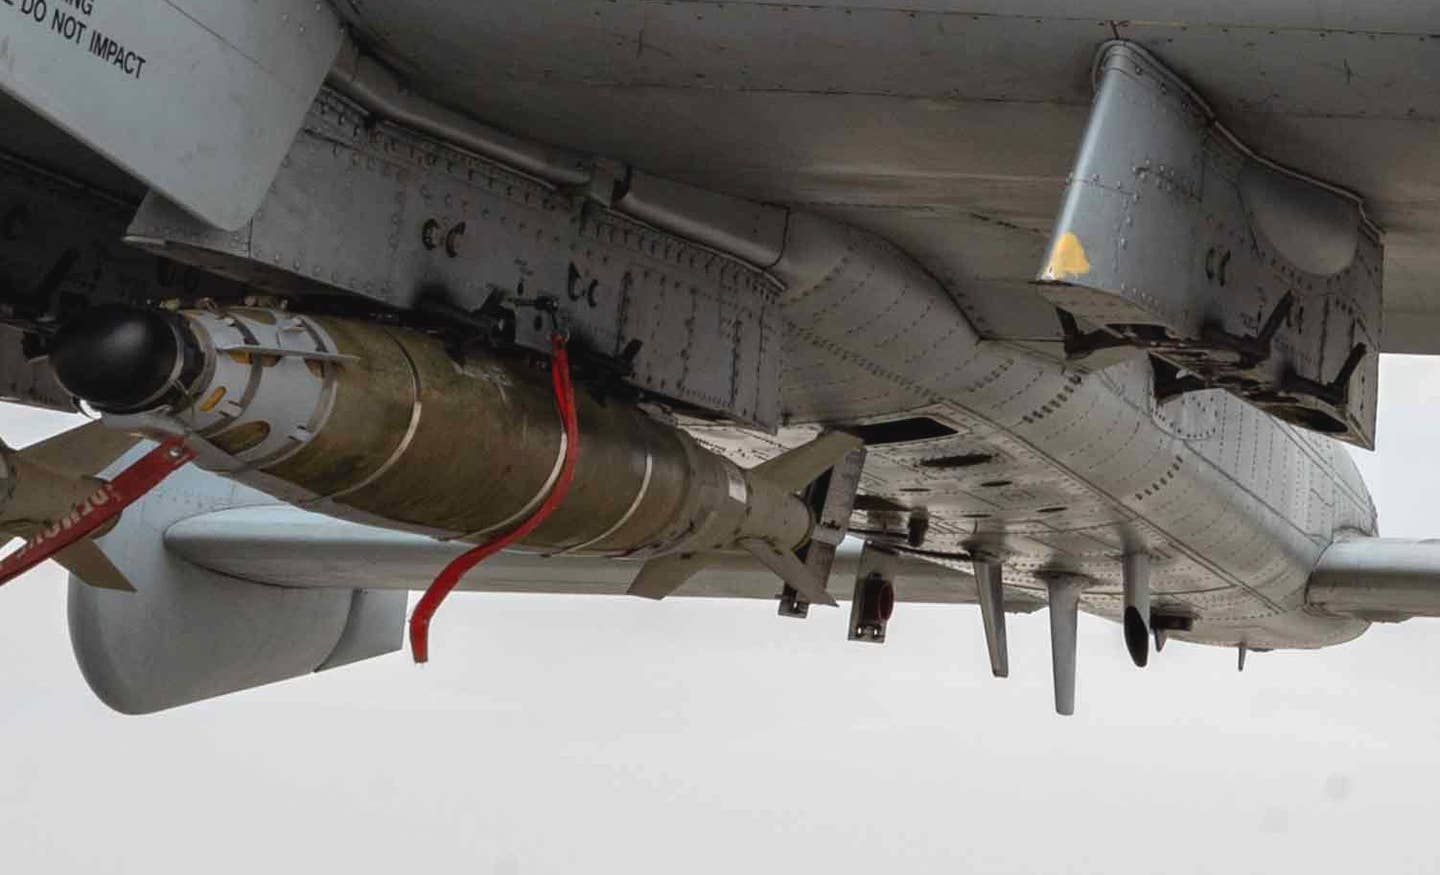 A full look at the LJDAM on one of the A-10s. The tail of the other JDAM loaded on this aircraft is just visible to the right. <em>USAF</em>